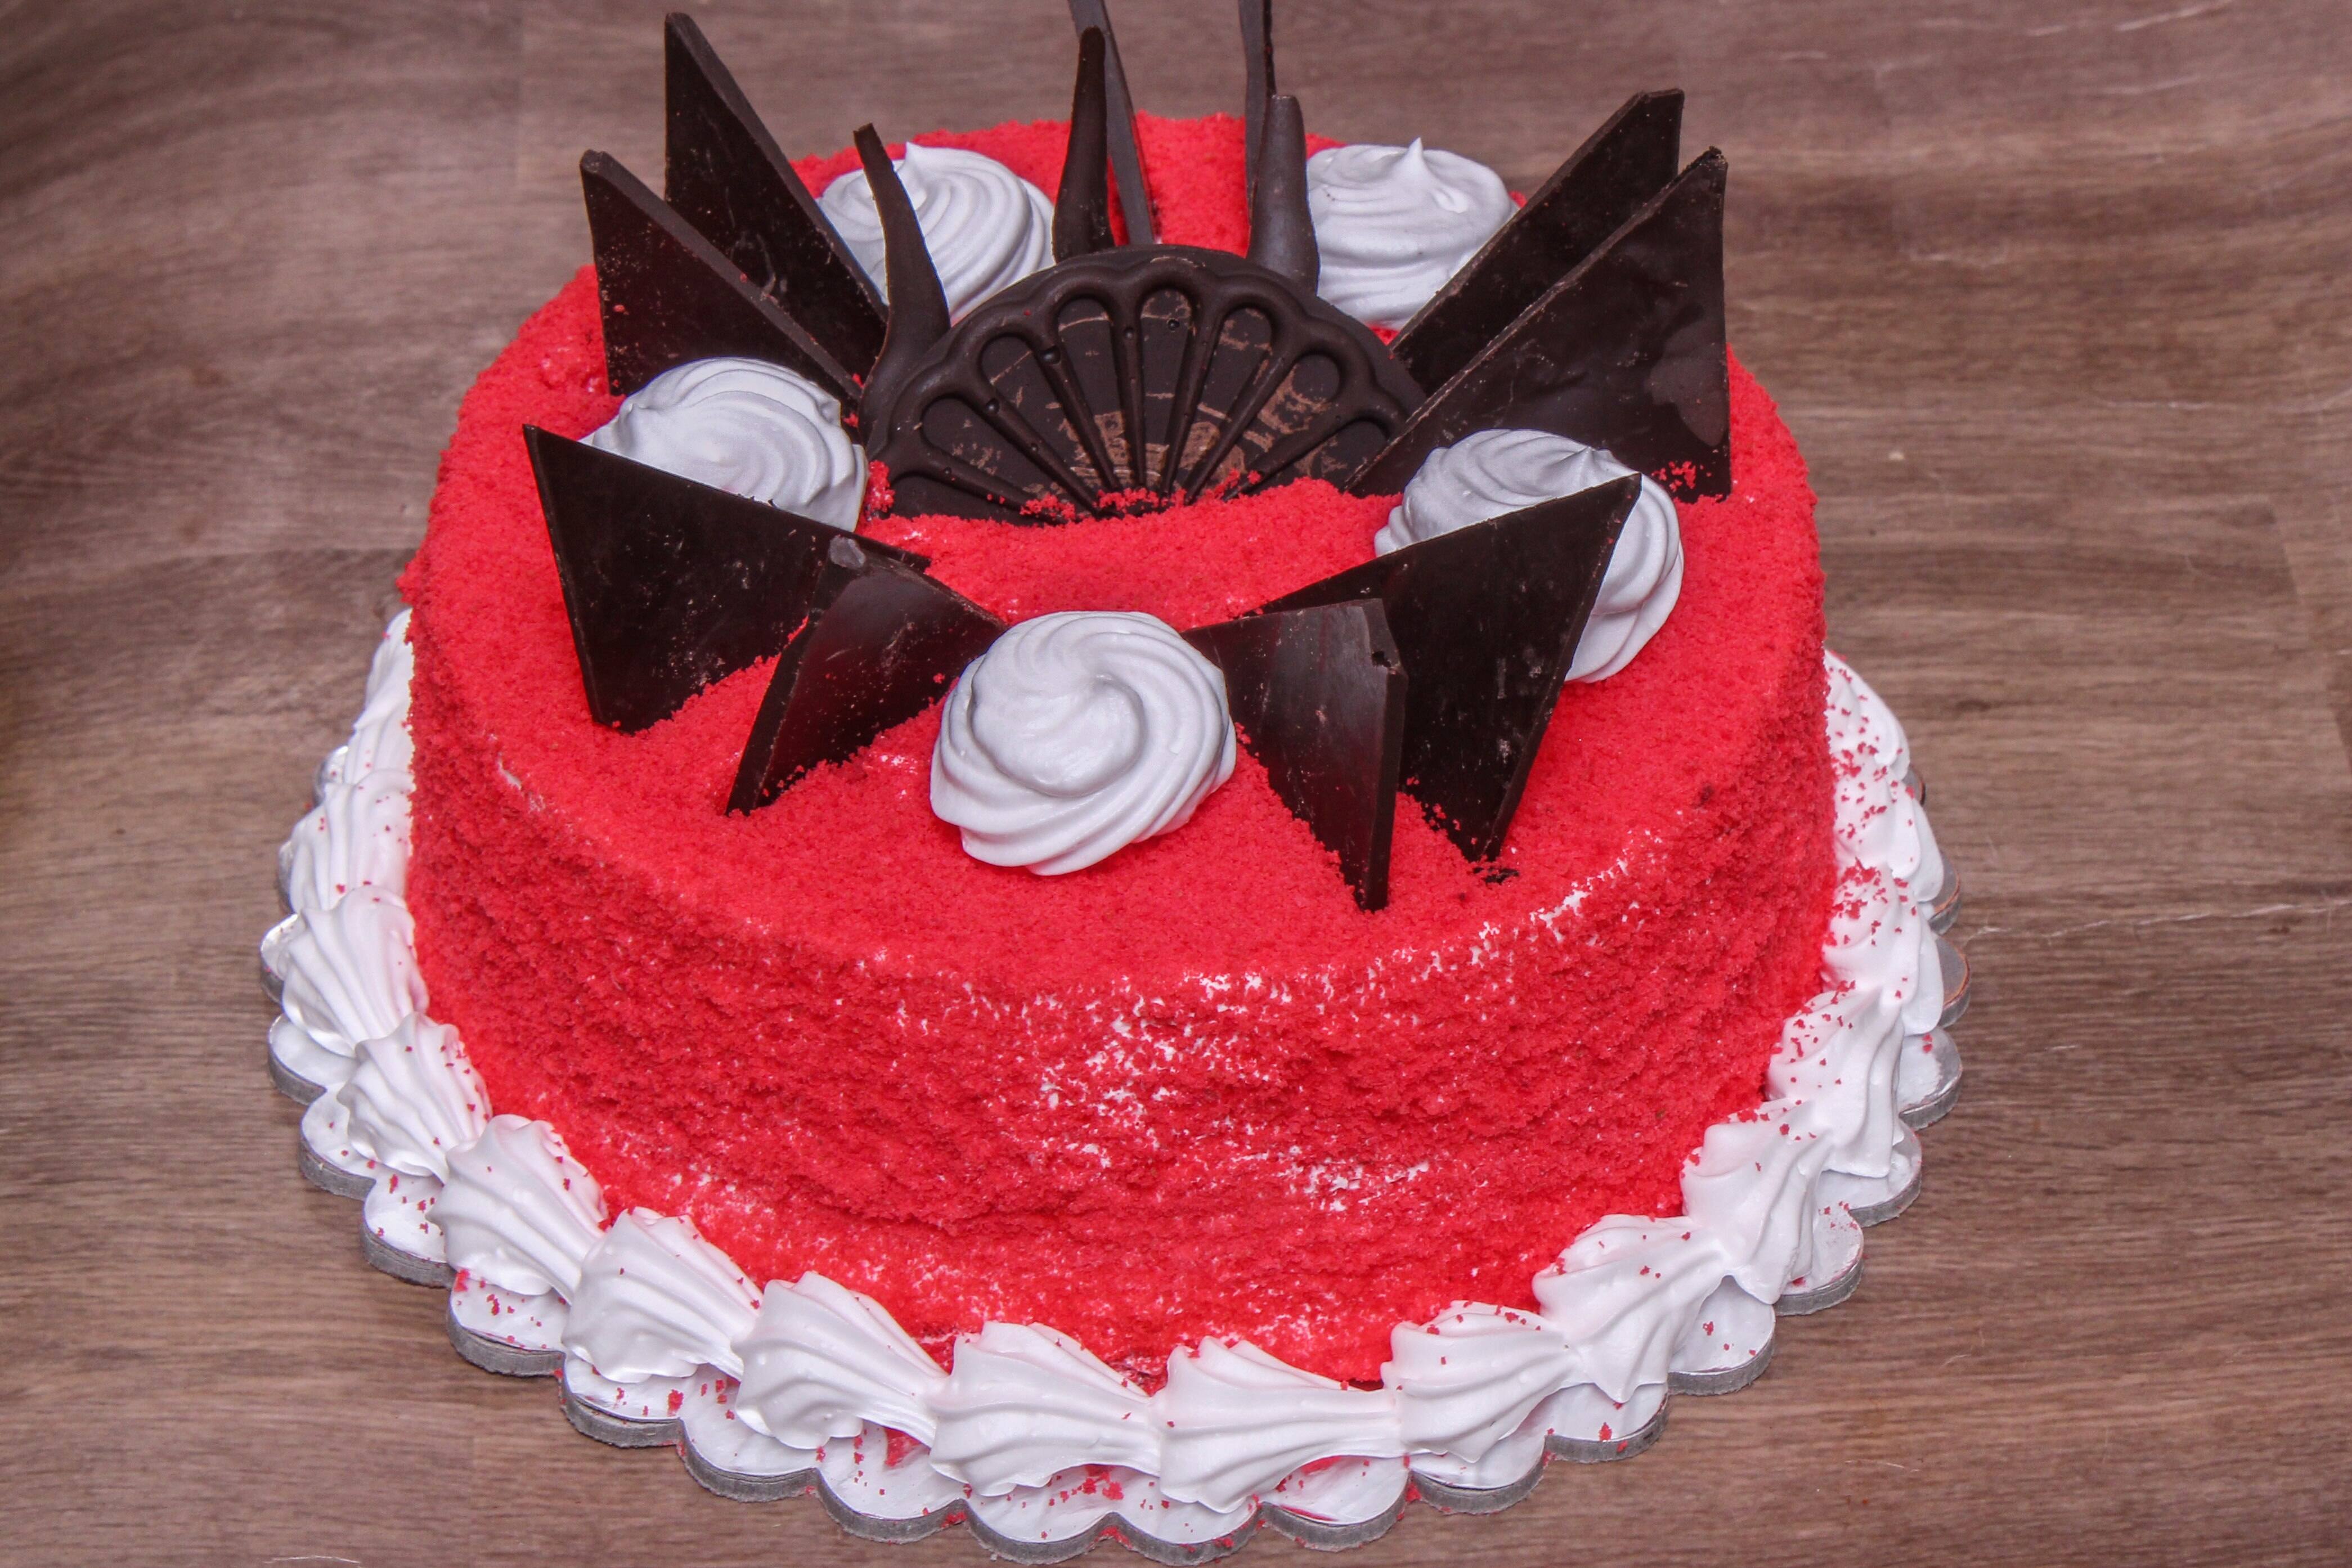 Details more than 70 cake lounge pune reviews latest - awesomeenglish.edu.vn